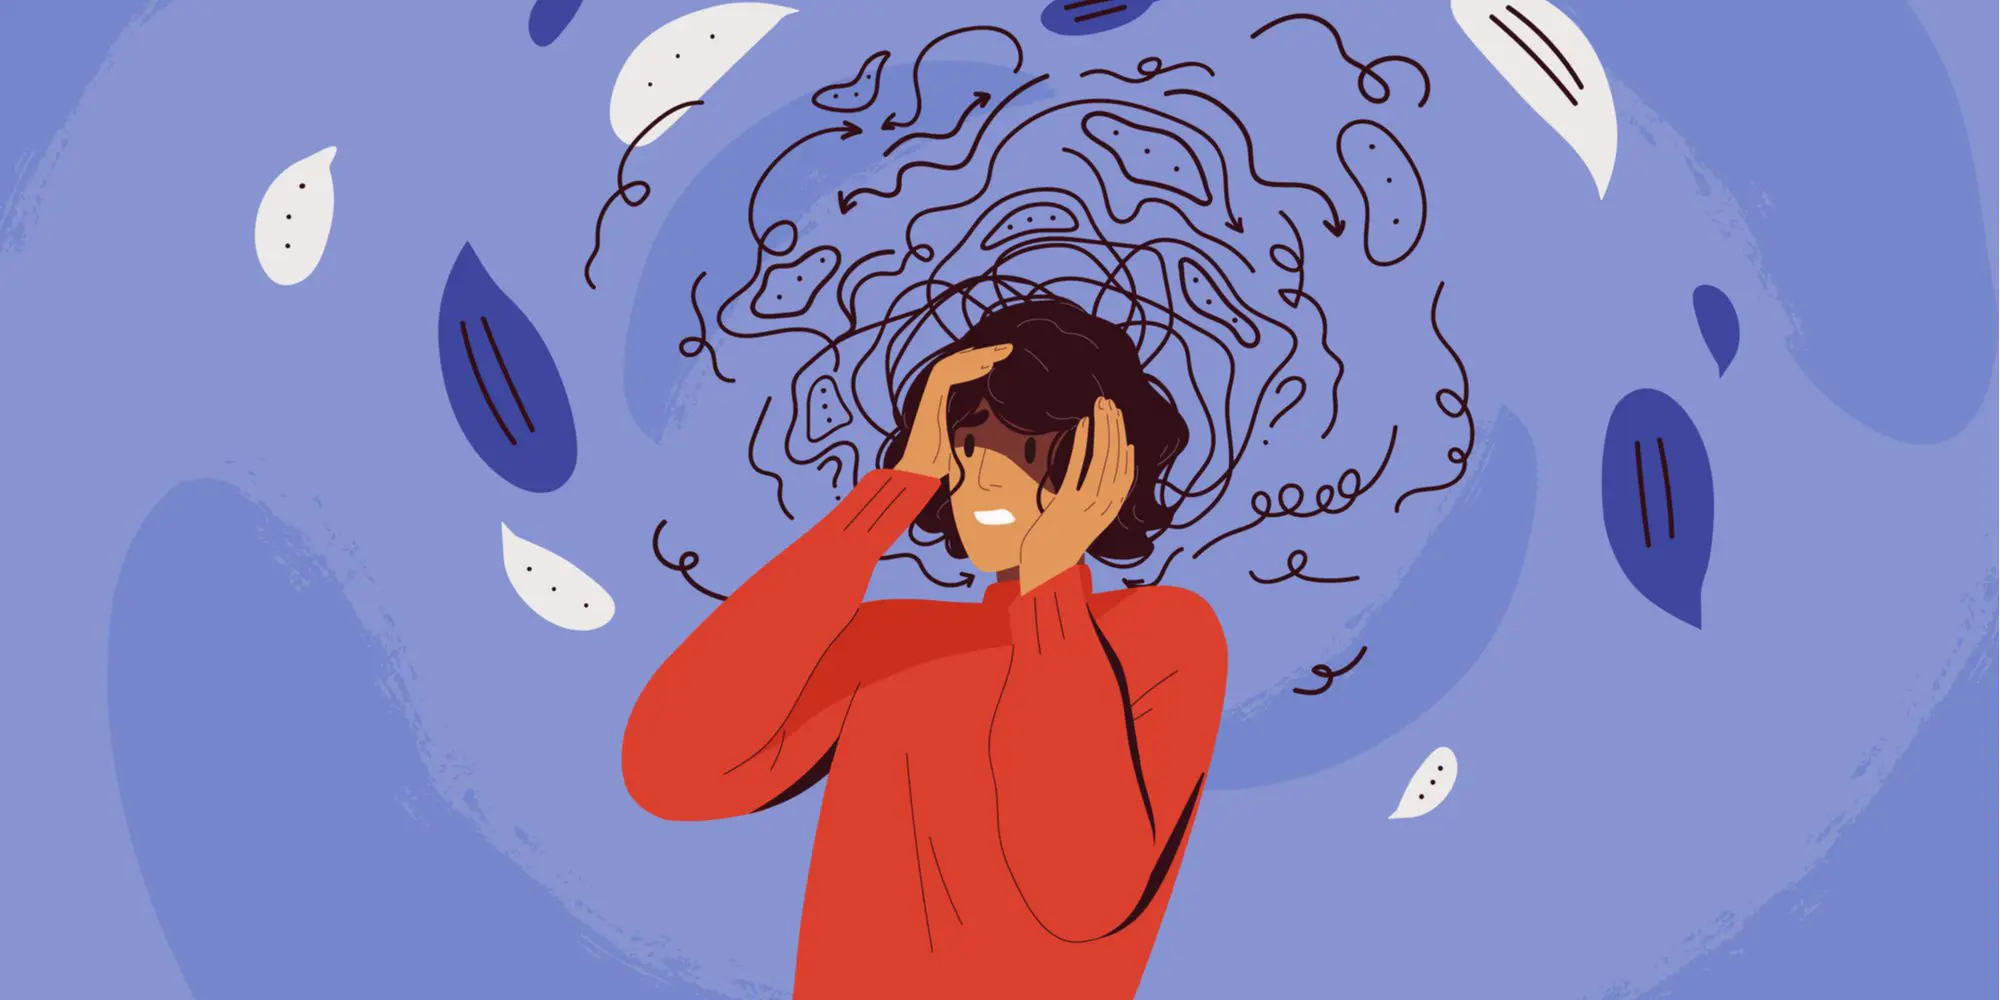 Anxiety: More Than Just Worry